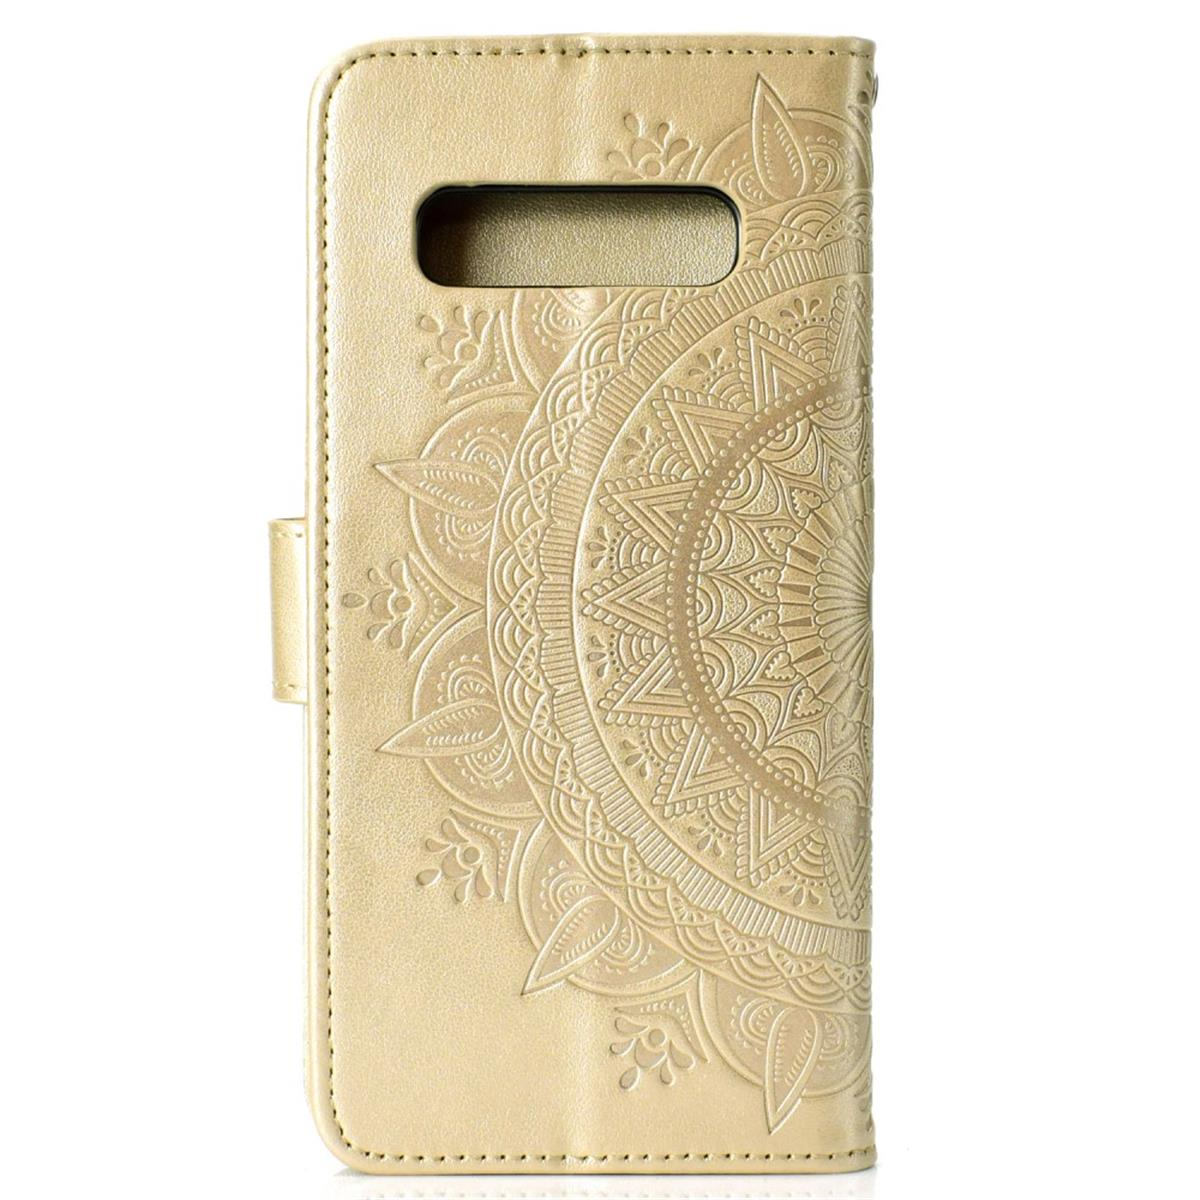 COVERKINGZ Klapphülle mit Mandala Gold Muster, Samsung, Bookcover, Galaxy S10